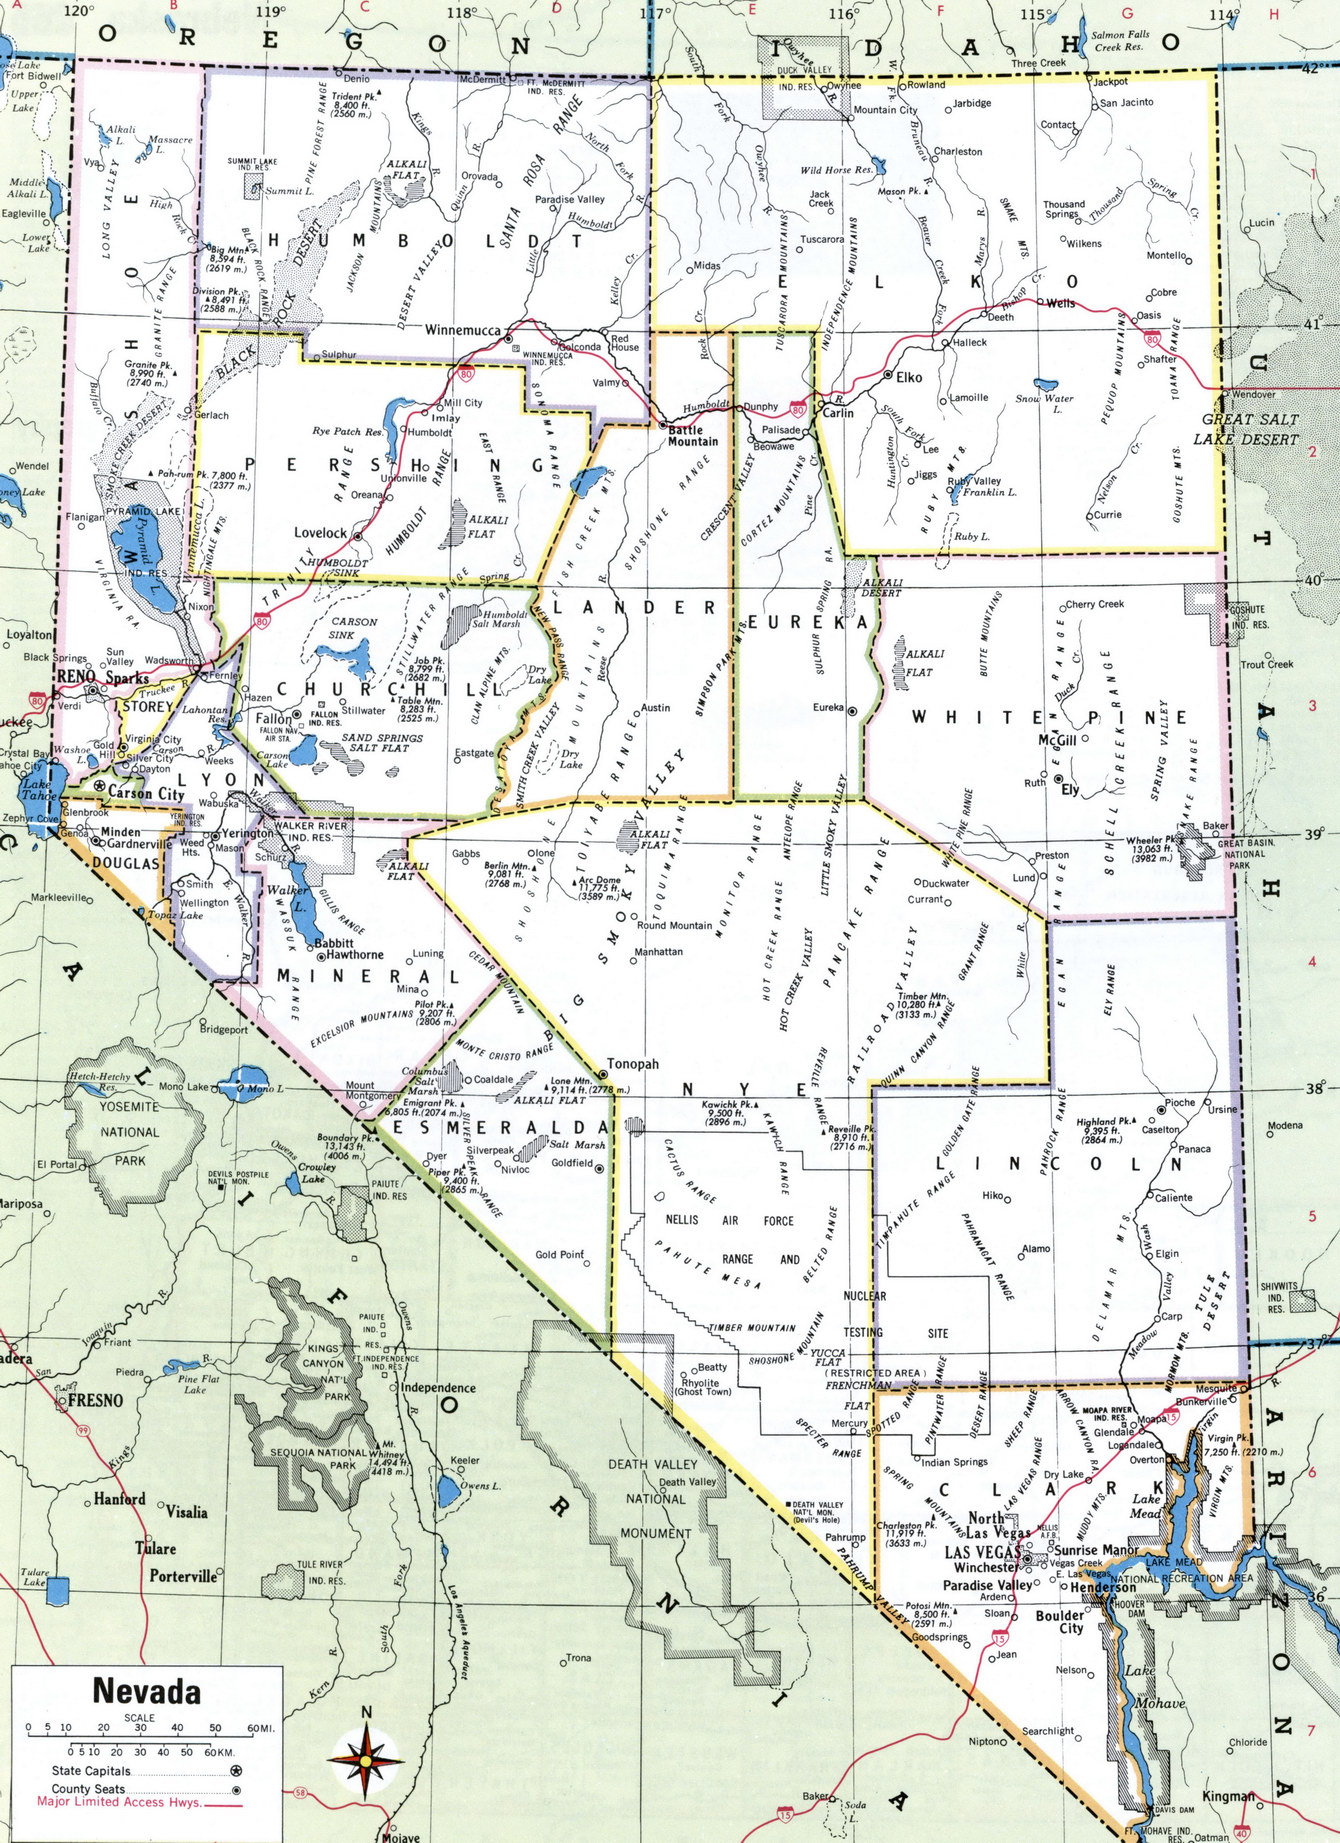 Map of Nevada by county